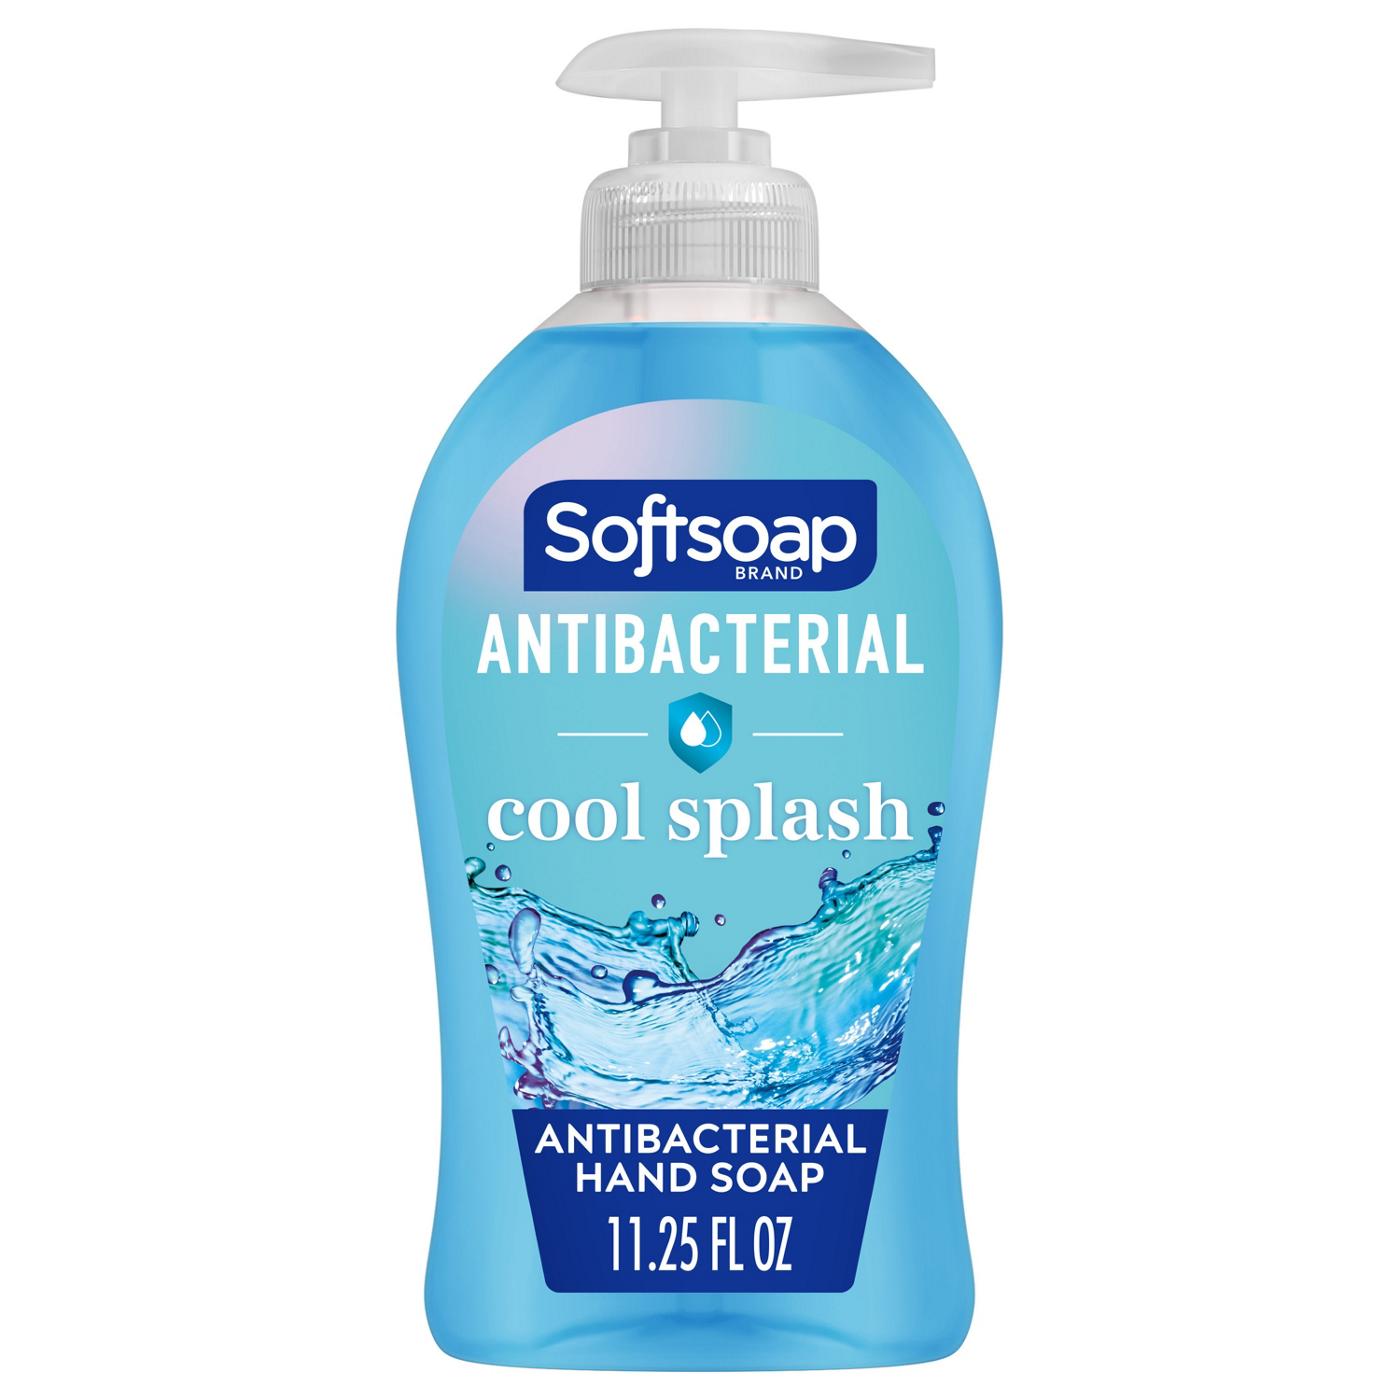 Softsoap Antibacterial Hand Soap - Cool Splash; image 1 of 9